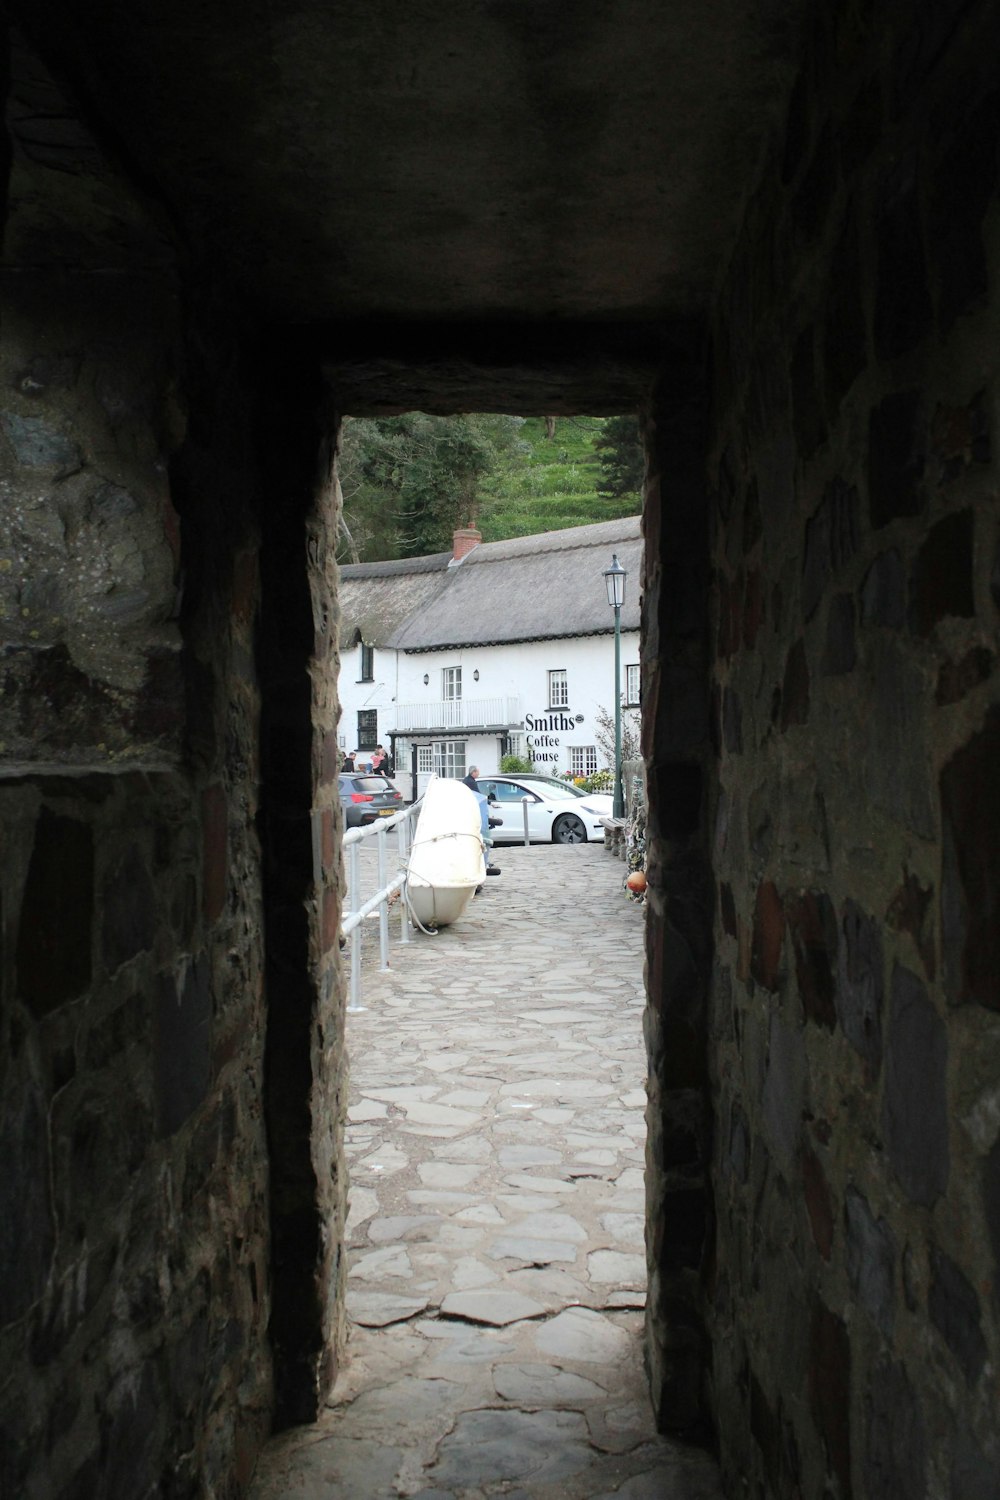 a view of a building through a stone tunnel